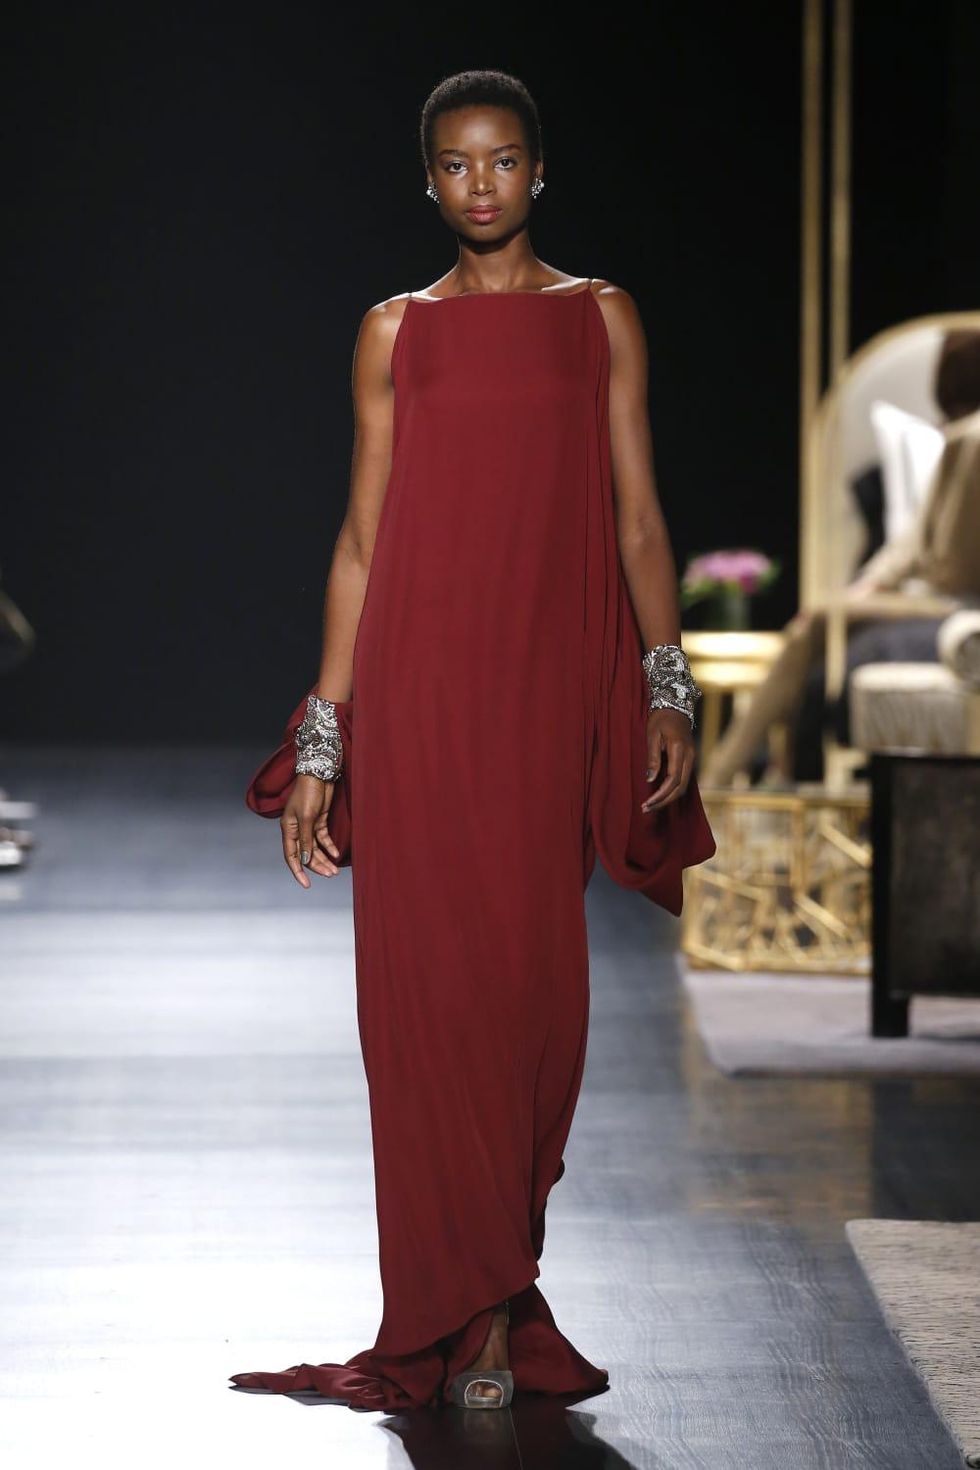 Badgley Mischka returns with new home and sportswear collections, along ...